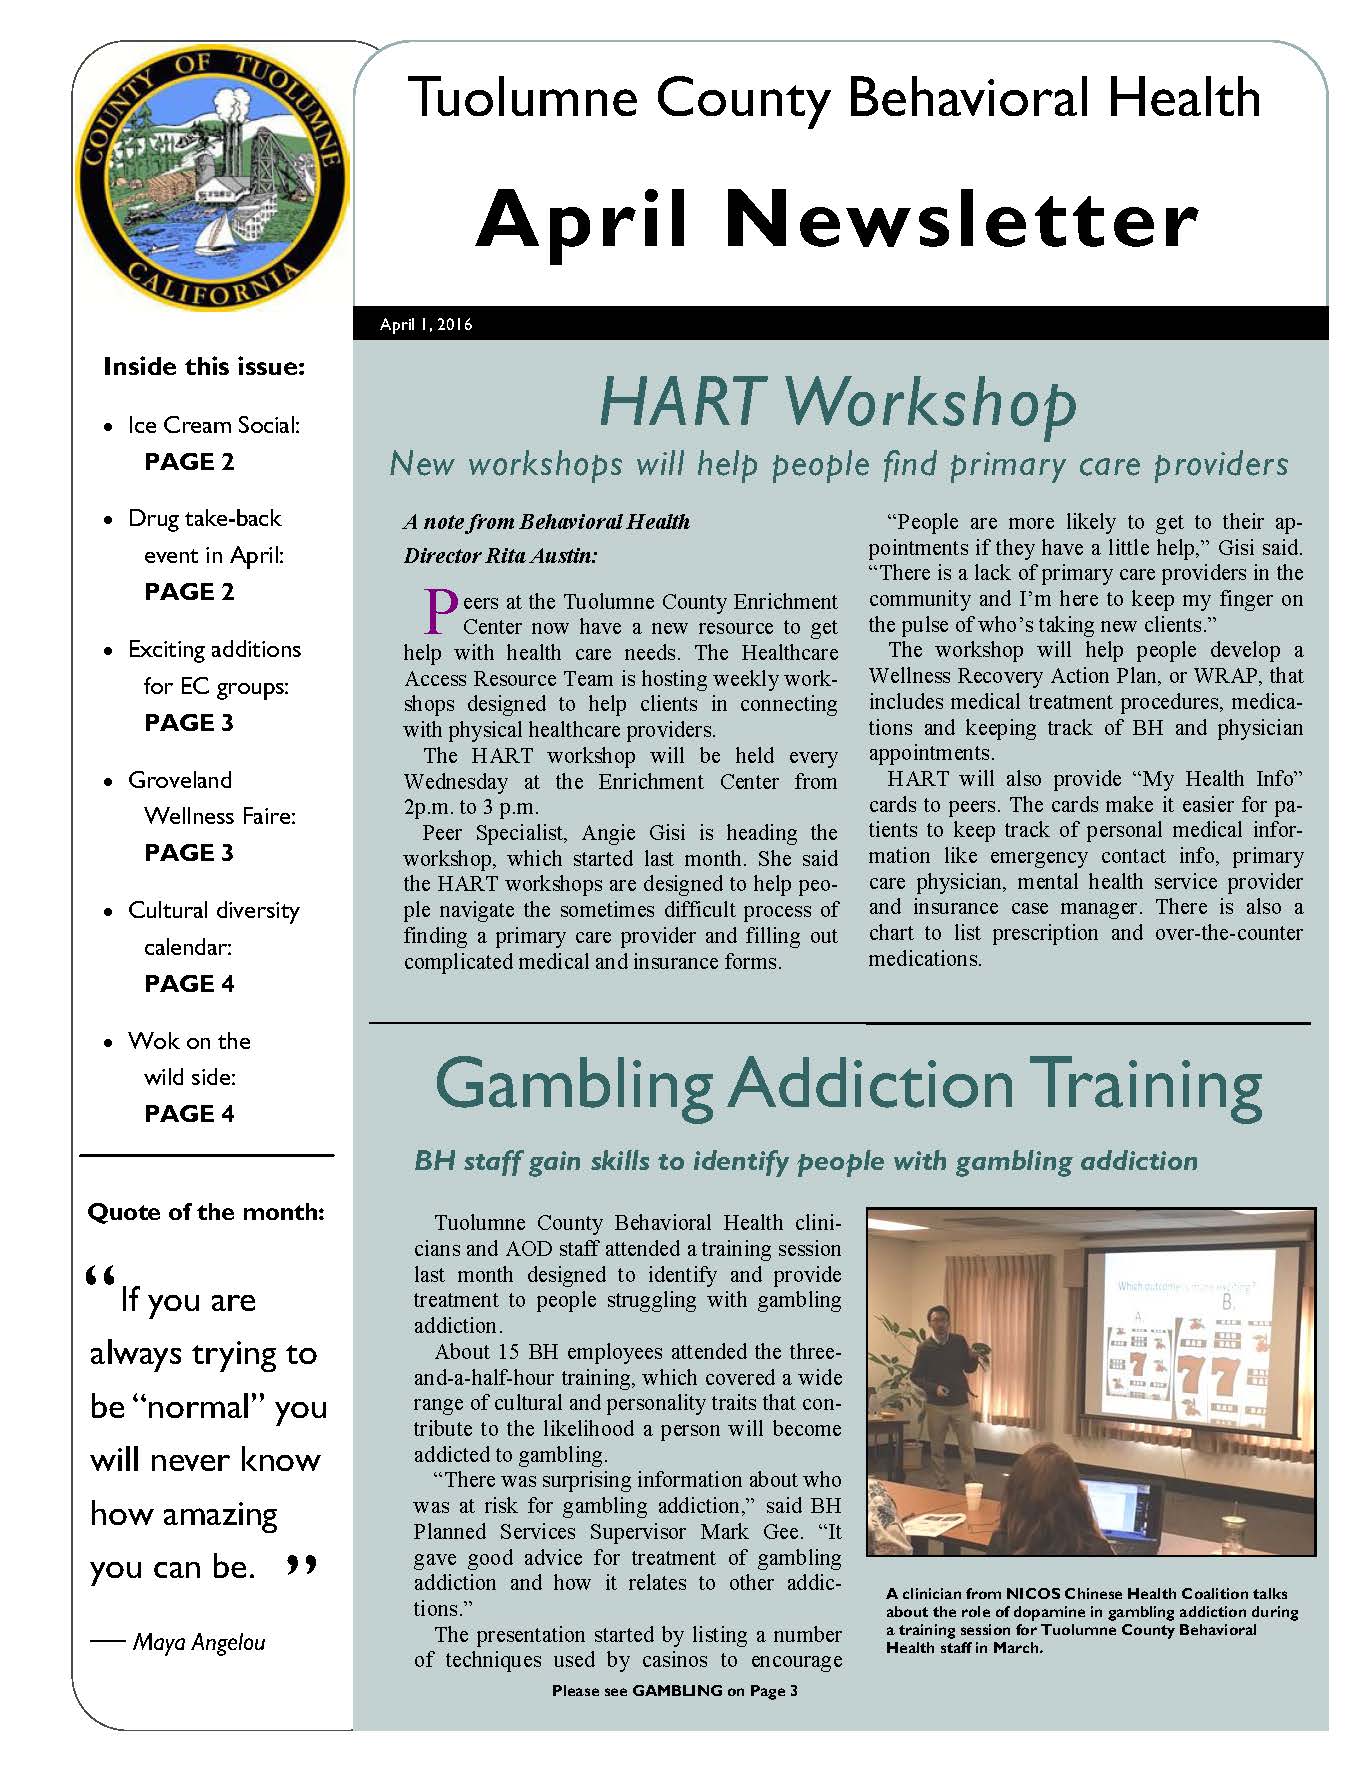 Beh Health April Newsletter Page 1